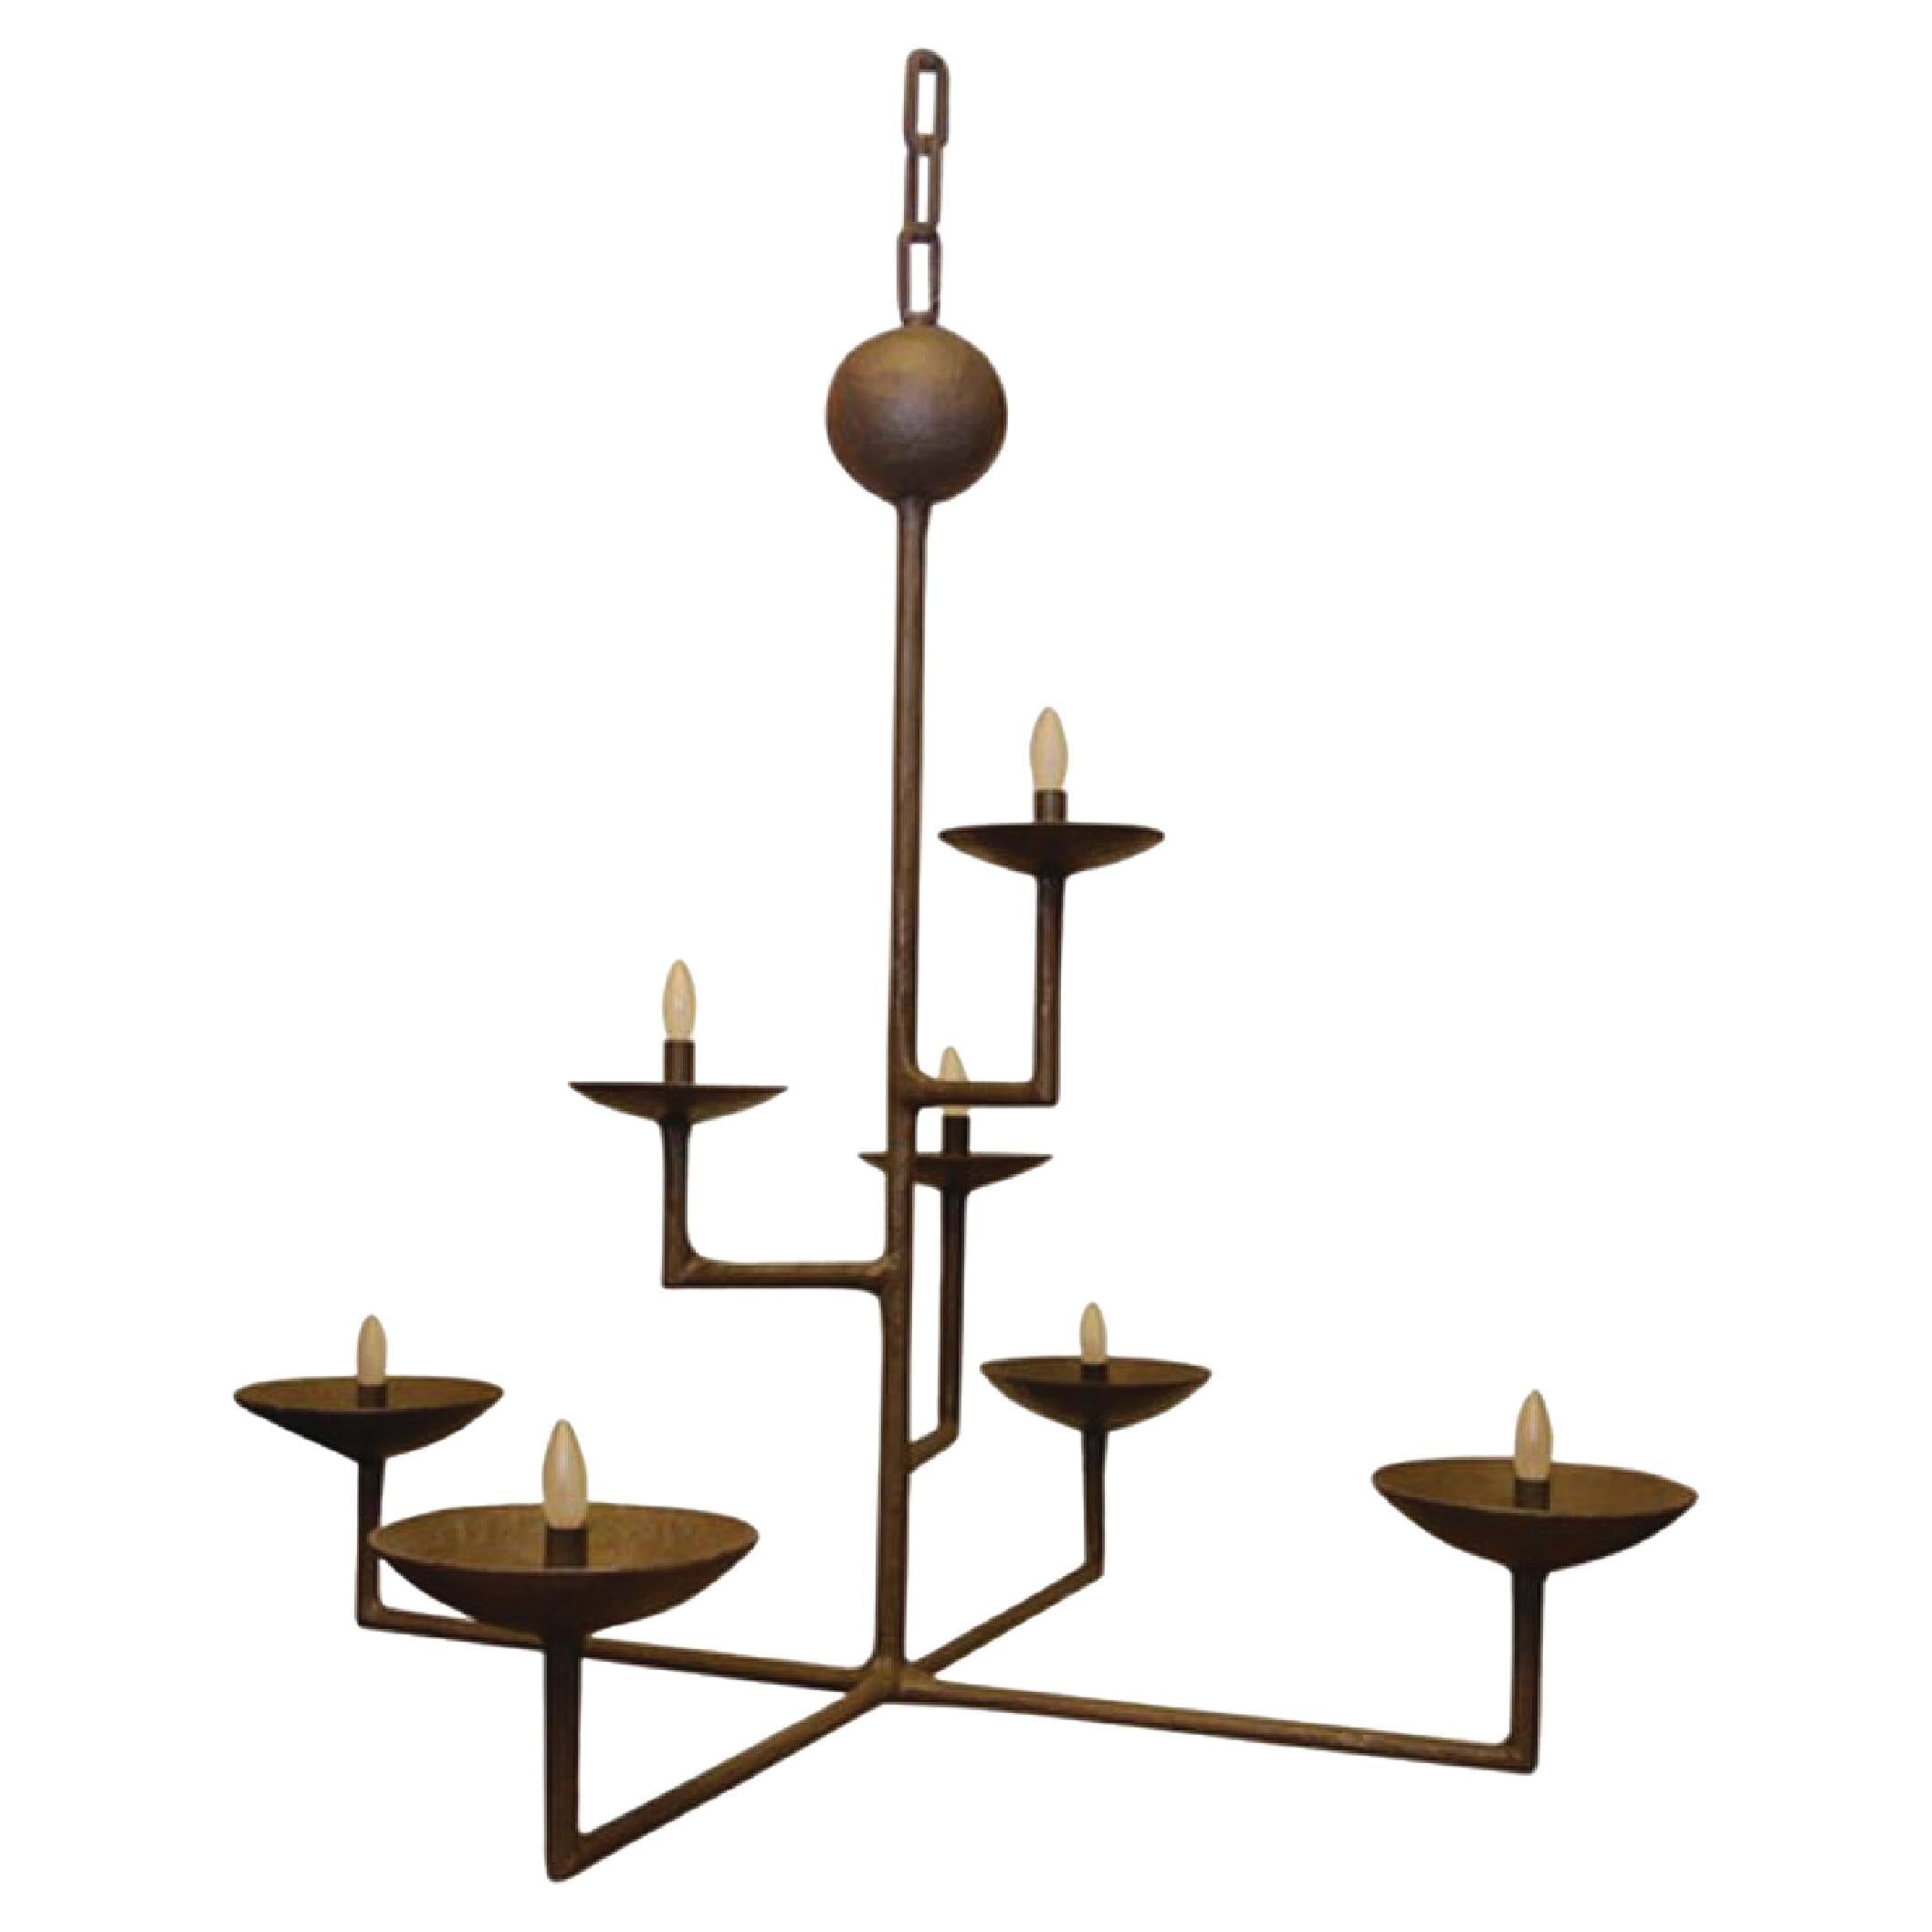 7 Cup Plaster Chandelier in a Bronze Finish with Full Ball and Chain For Sale